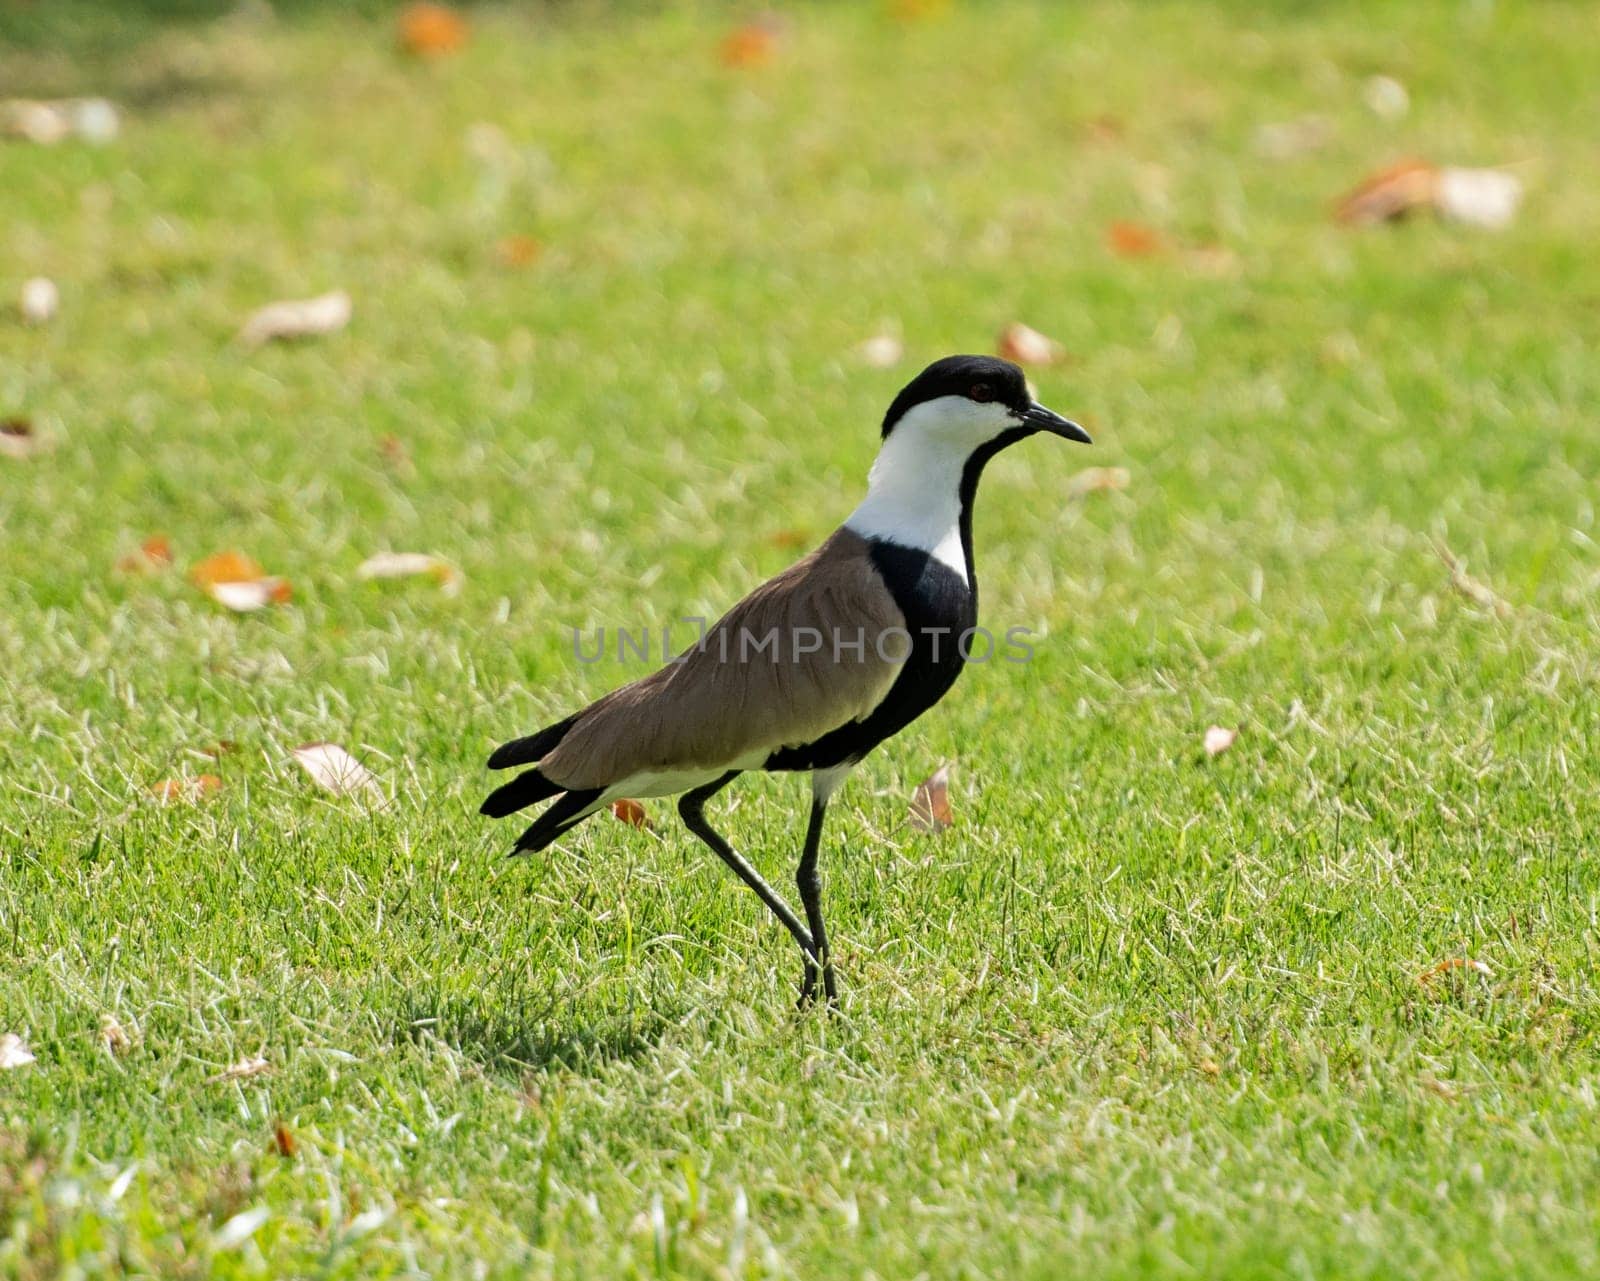 Spur winged lapwing stood on grass in garden by paulvinten